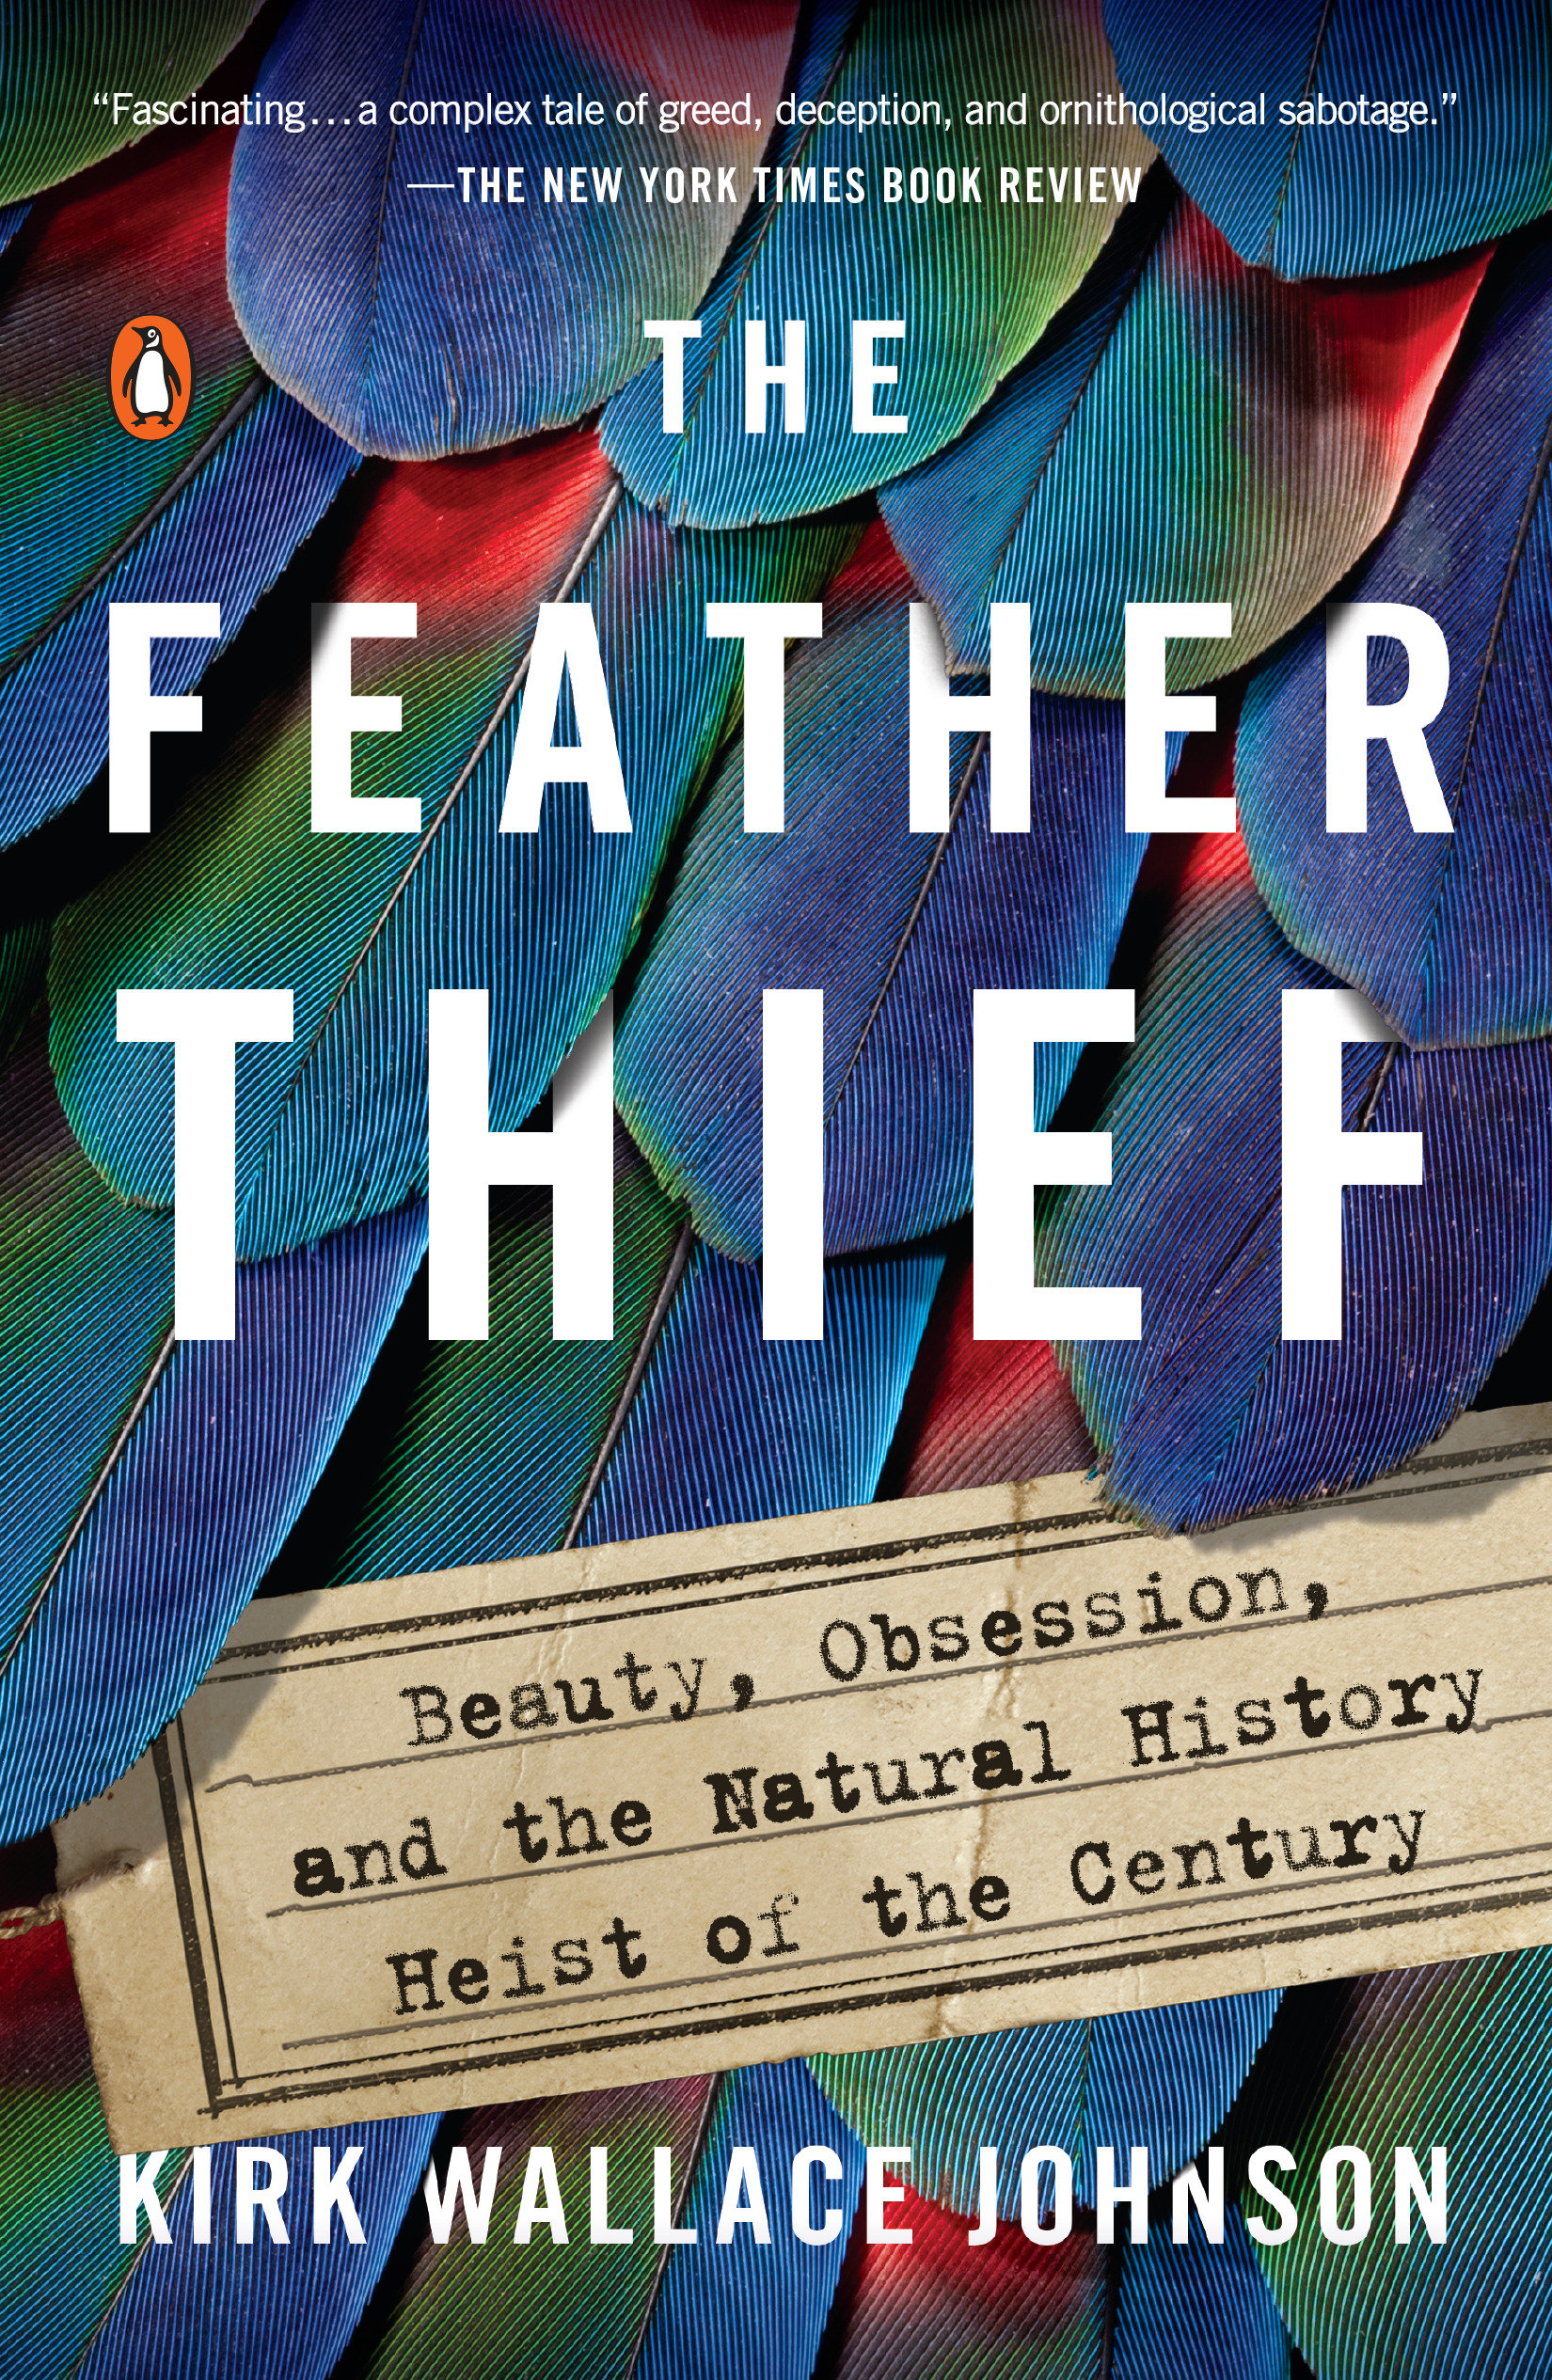 Umschlagbild für The Feather Thief [electronic resource] : Beauty, Obsession, and the Natural History Heist of the Century